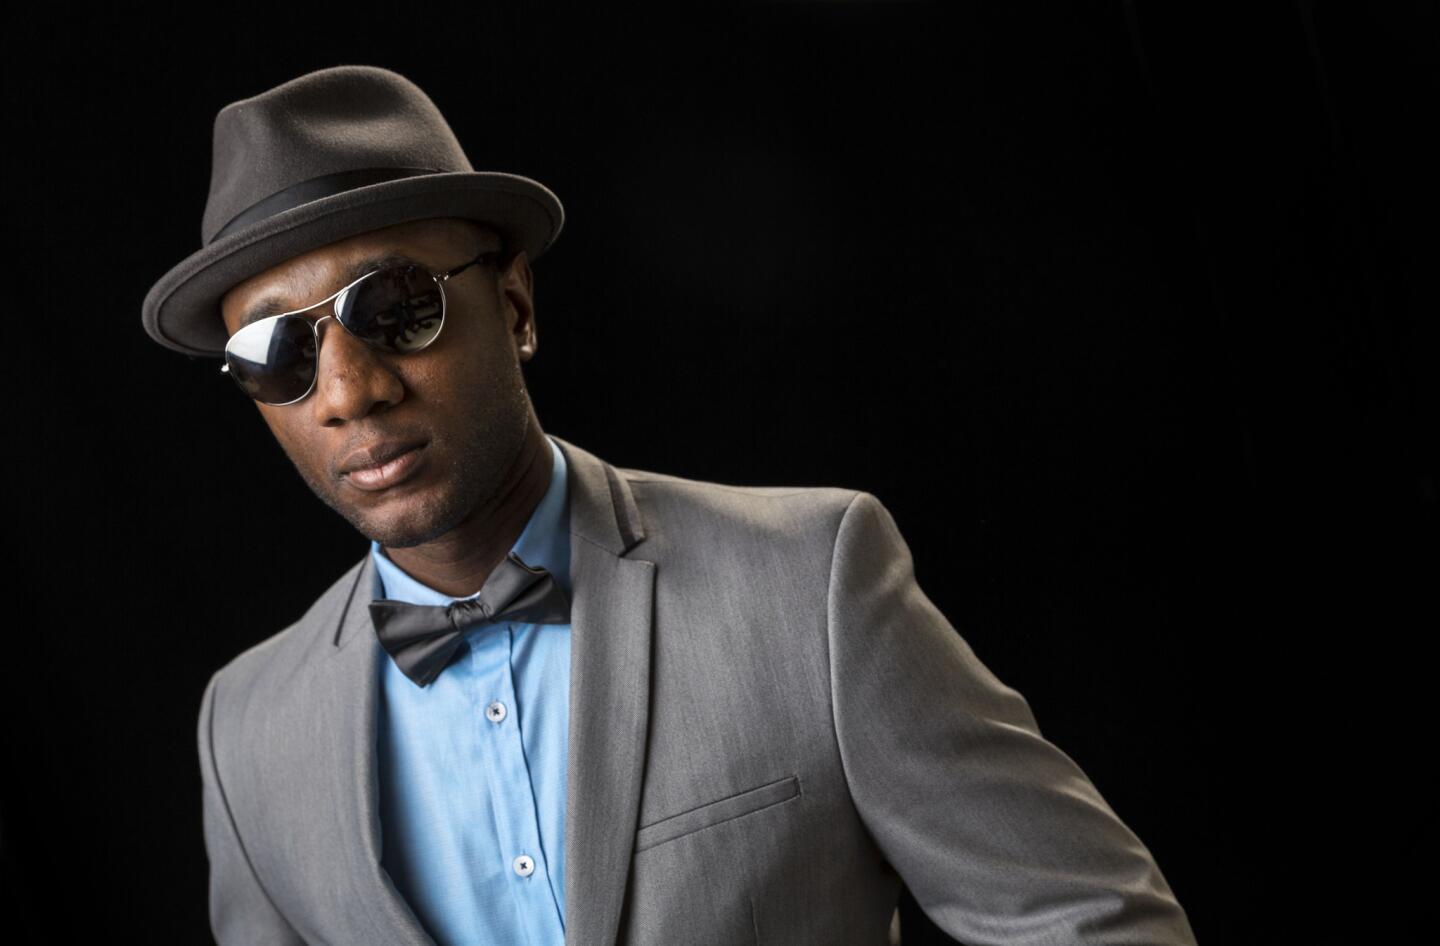 "I want to make songs that give me a chance to be creative and artistic in the way I write my lyrics and present my vocal. But from a production standpoint, it has to be competitive with other stuff that's on the radio -- otherwise radio won't play it." - Aloe Blacc, as told to Mikael Wood on Sunday.